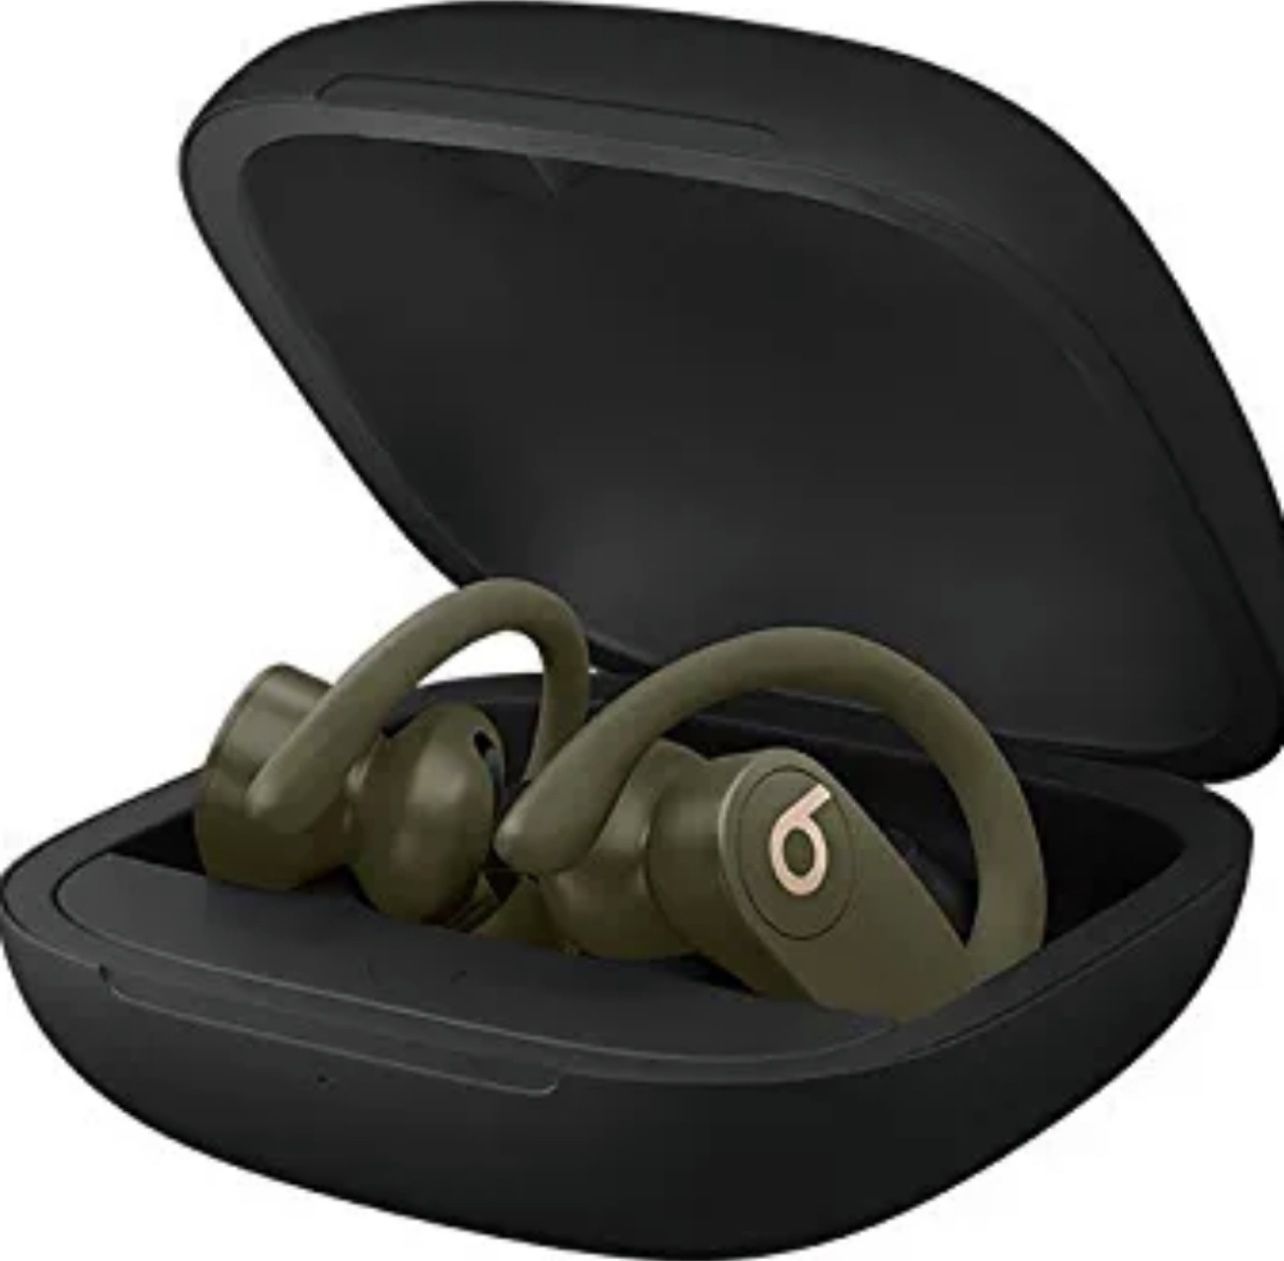 Beats by Dr. Dre - Powerbeats Pro Totally Wireless New